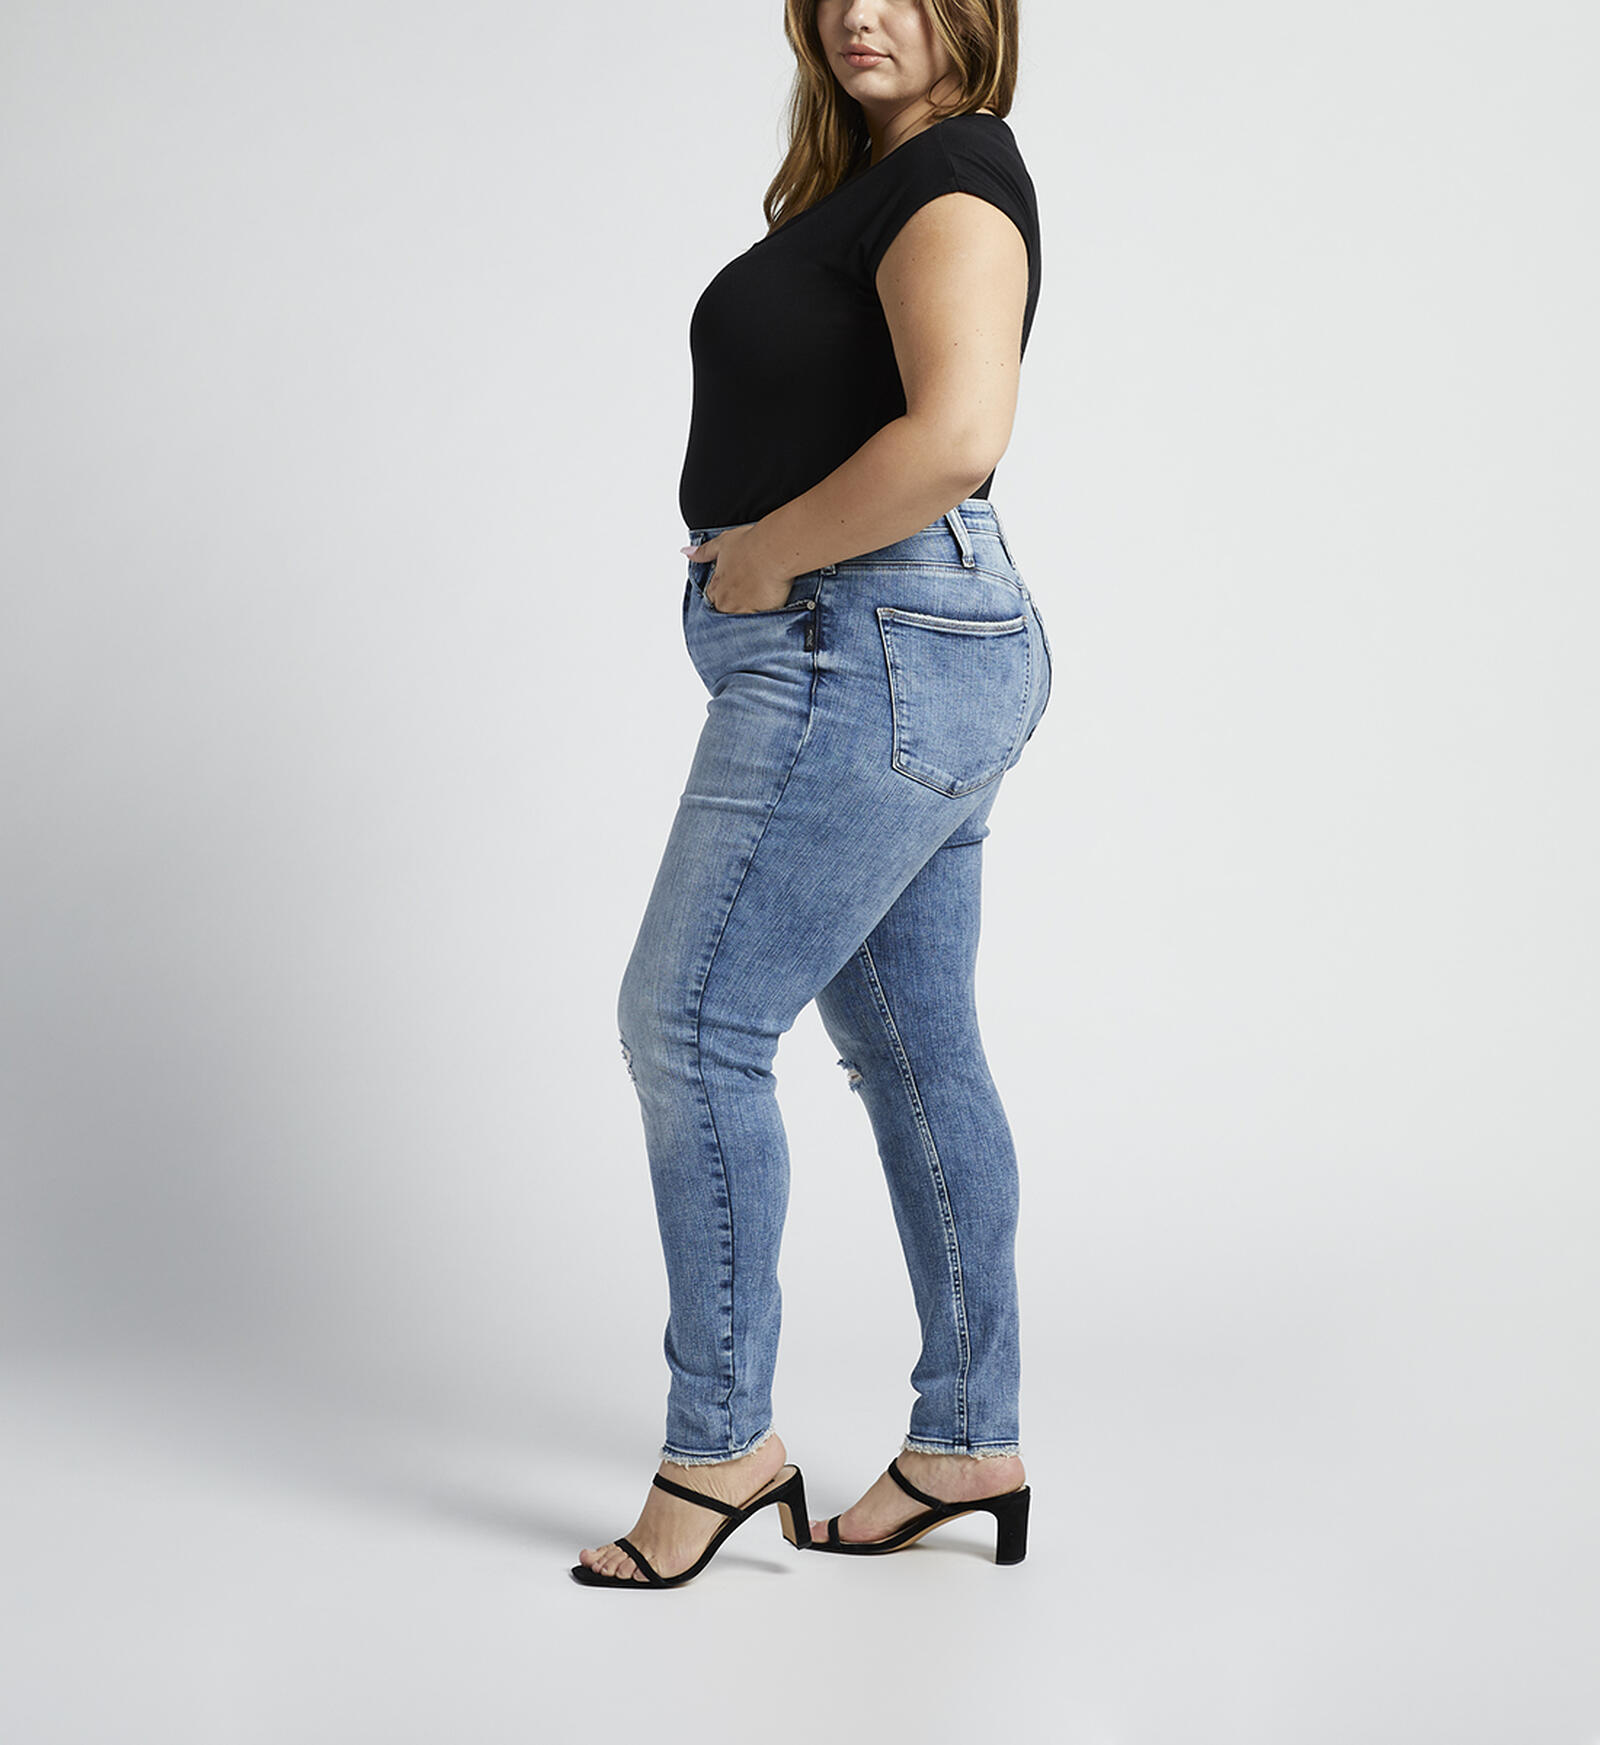 Buy Forever Stretch High Rise Skinny Jeans Plus Size for CAD 98.00